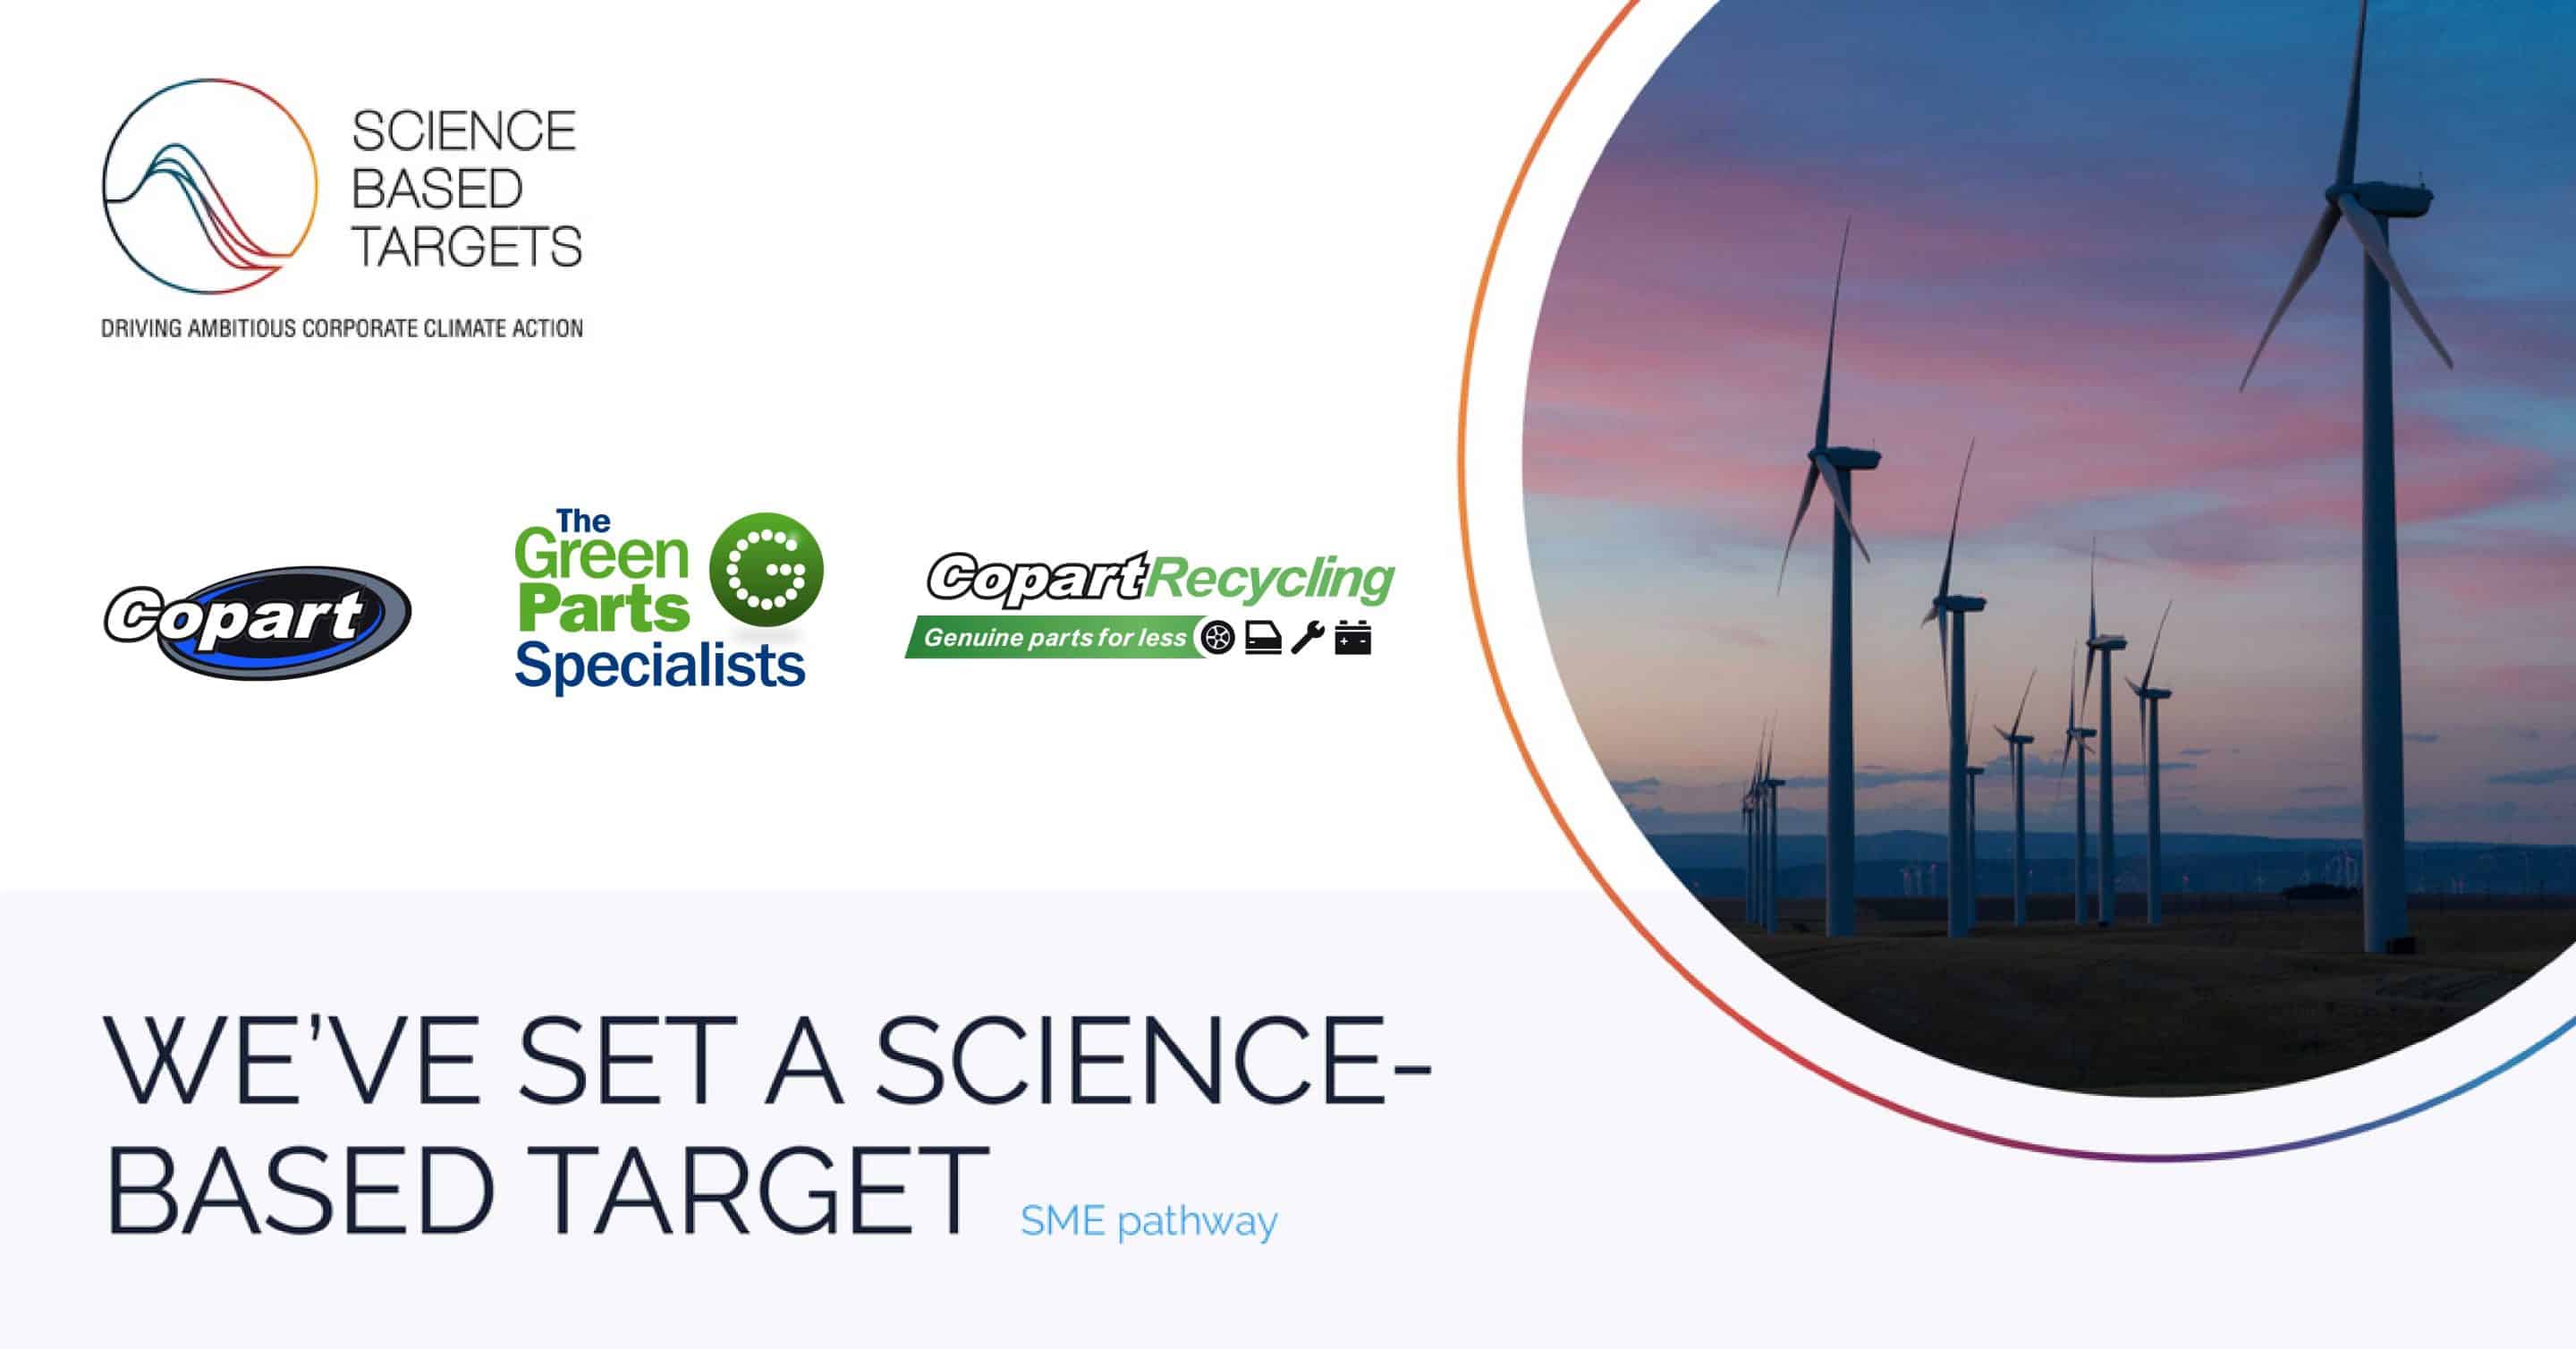 Copart Science-Based Targets